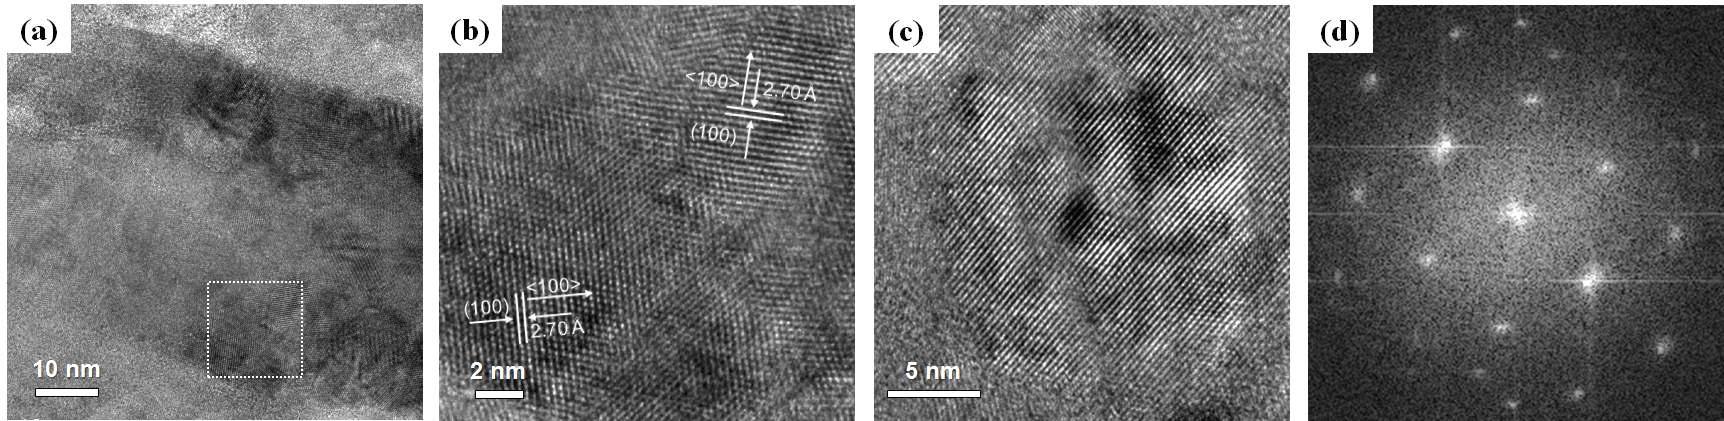 (a) HR-TEM cross-sectional images of ball-milled and heat-treated powder coatings: (a) dark contrast region, (b) higher magnification image of the dashed boxed region in (a), (c) single grain region, and (d) the FFT pattern of the single grain